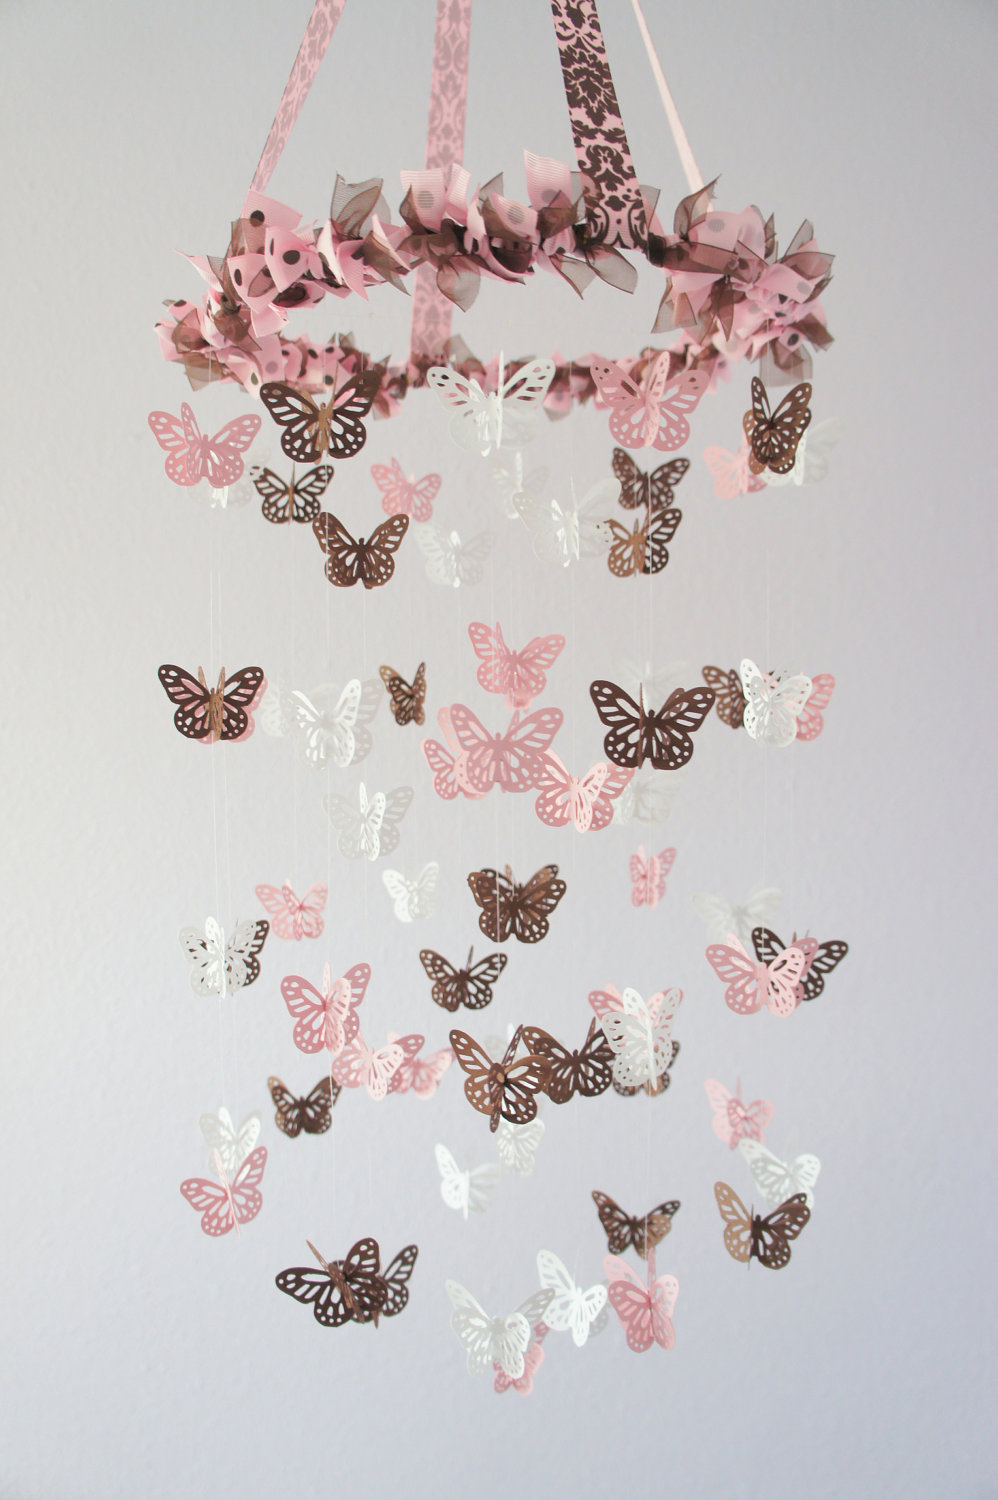 Butterfly Mobile - Pink, Brown And White Nursery Mobile, Baby Shower Gift, Photographer Prop